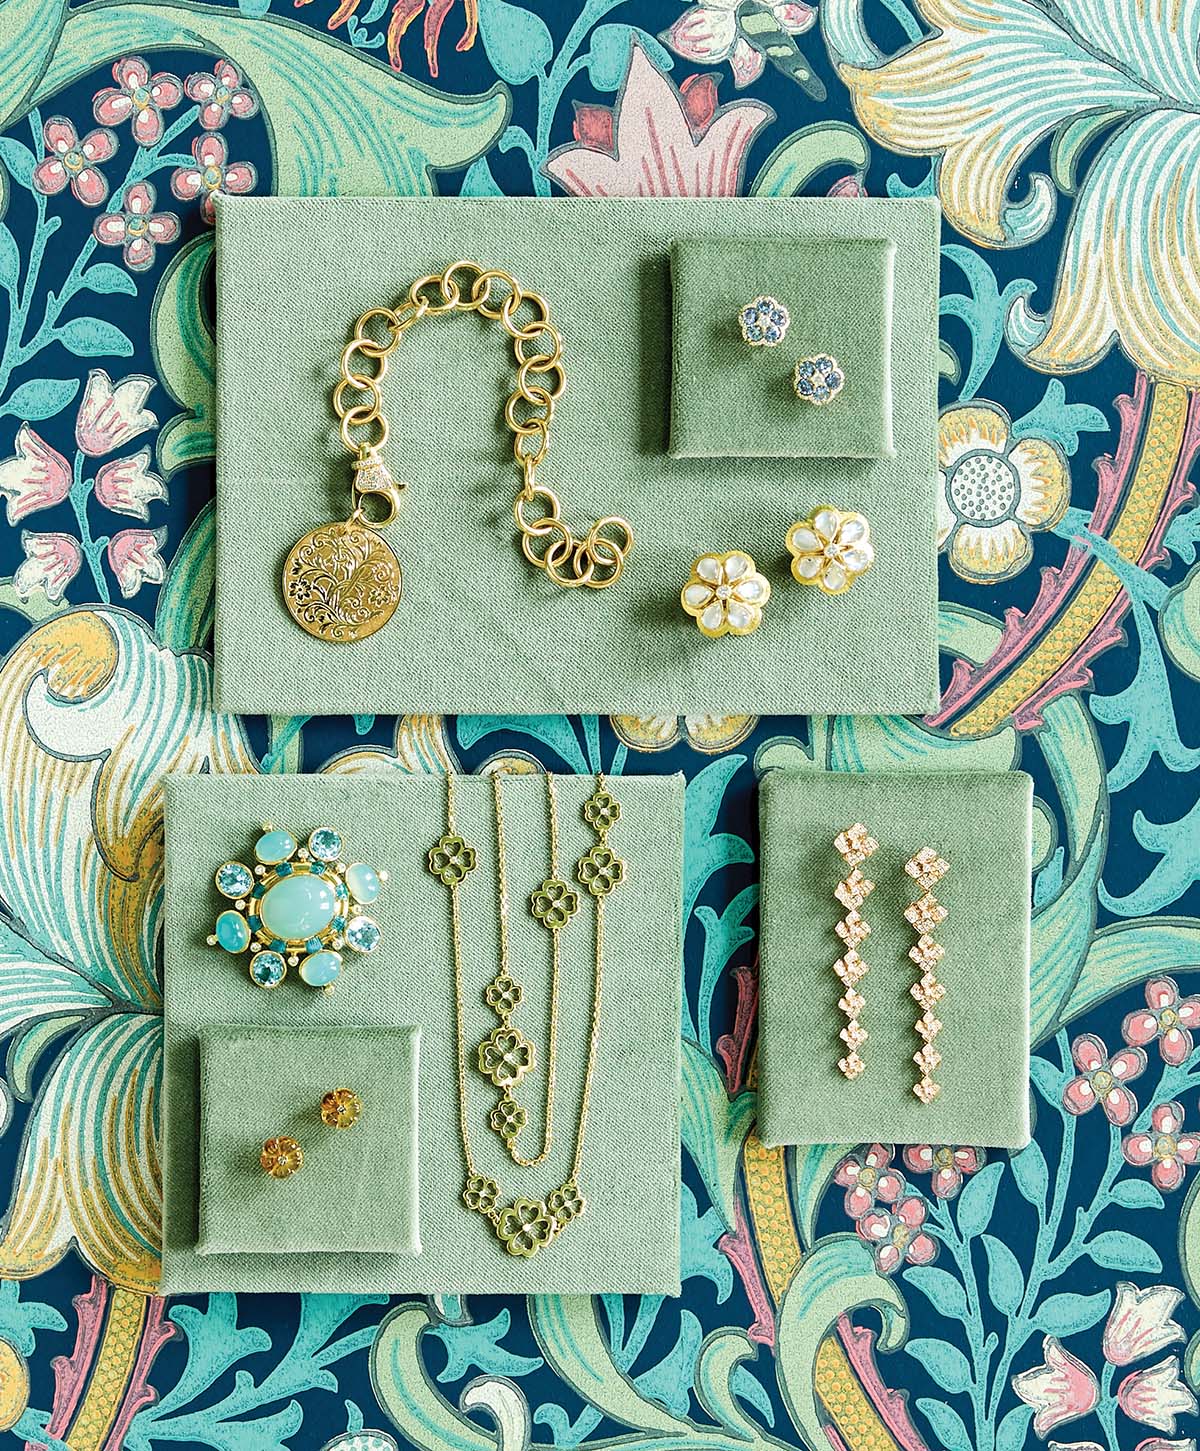 Pieces of jewelry styled on top of floral wallpaper.